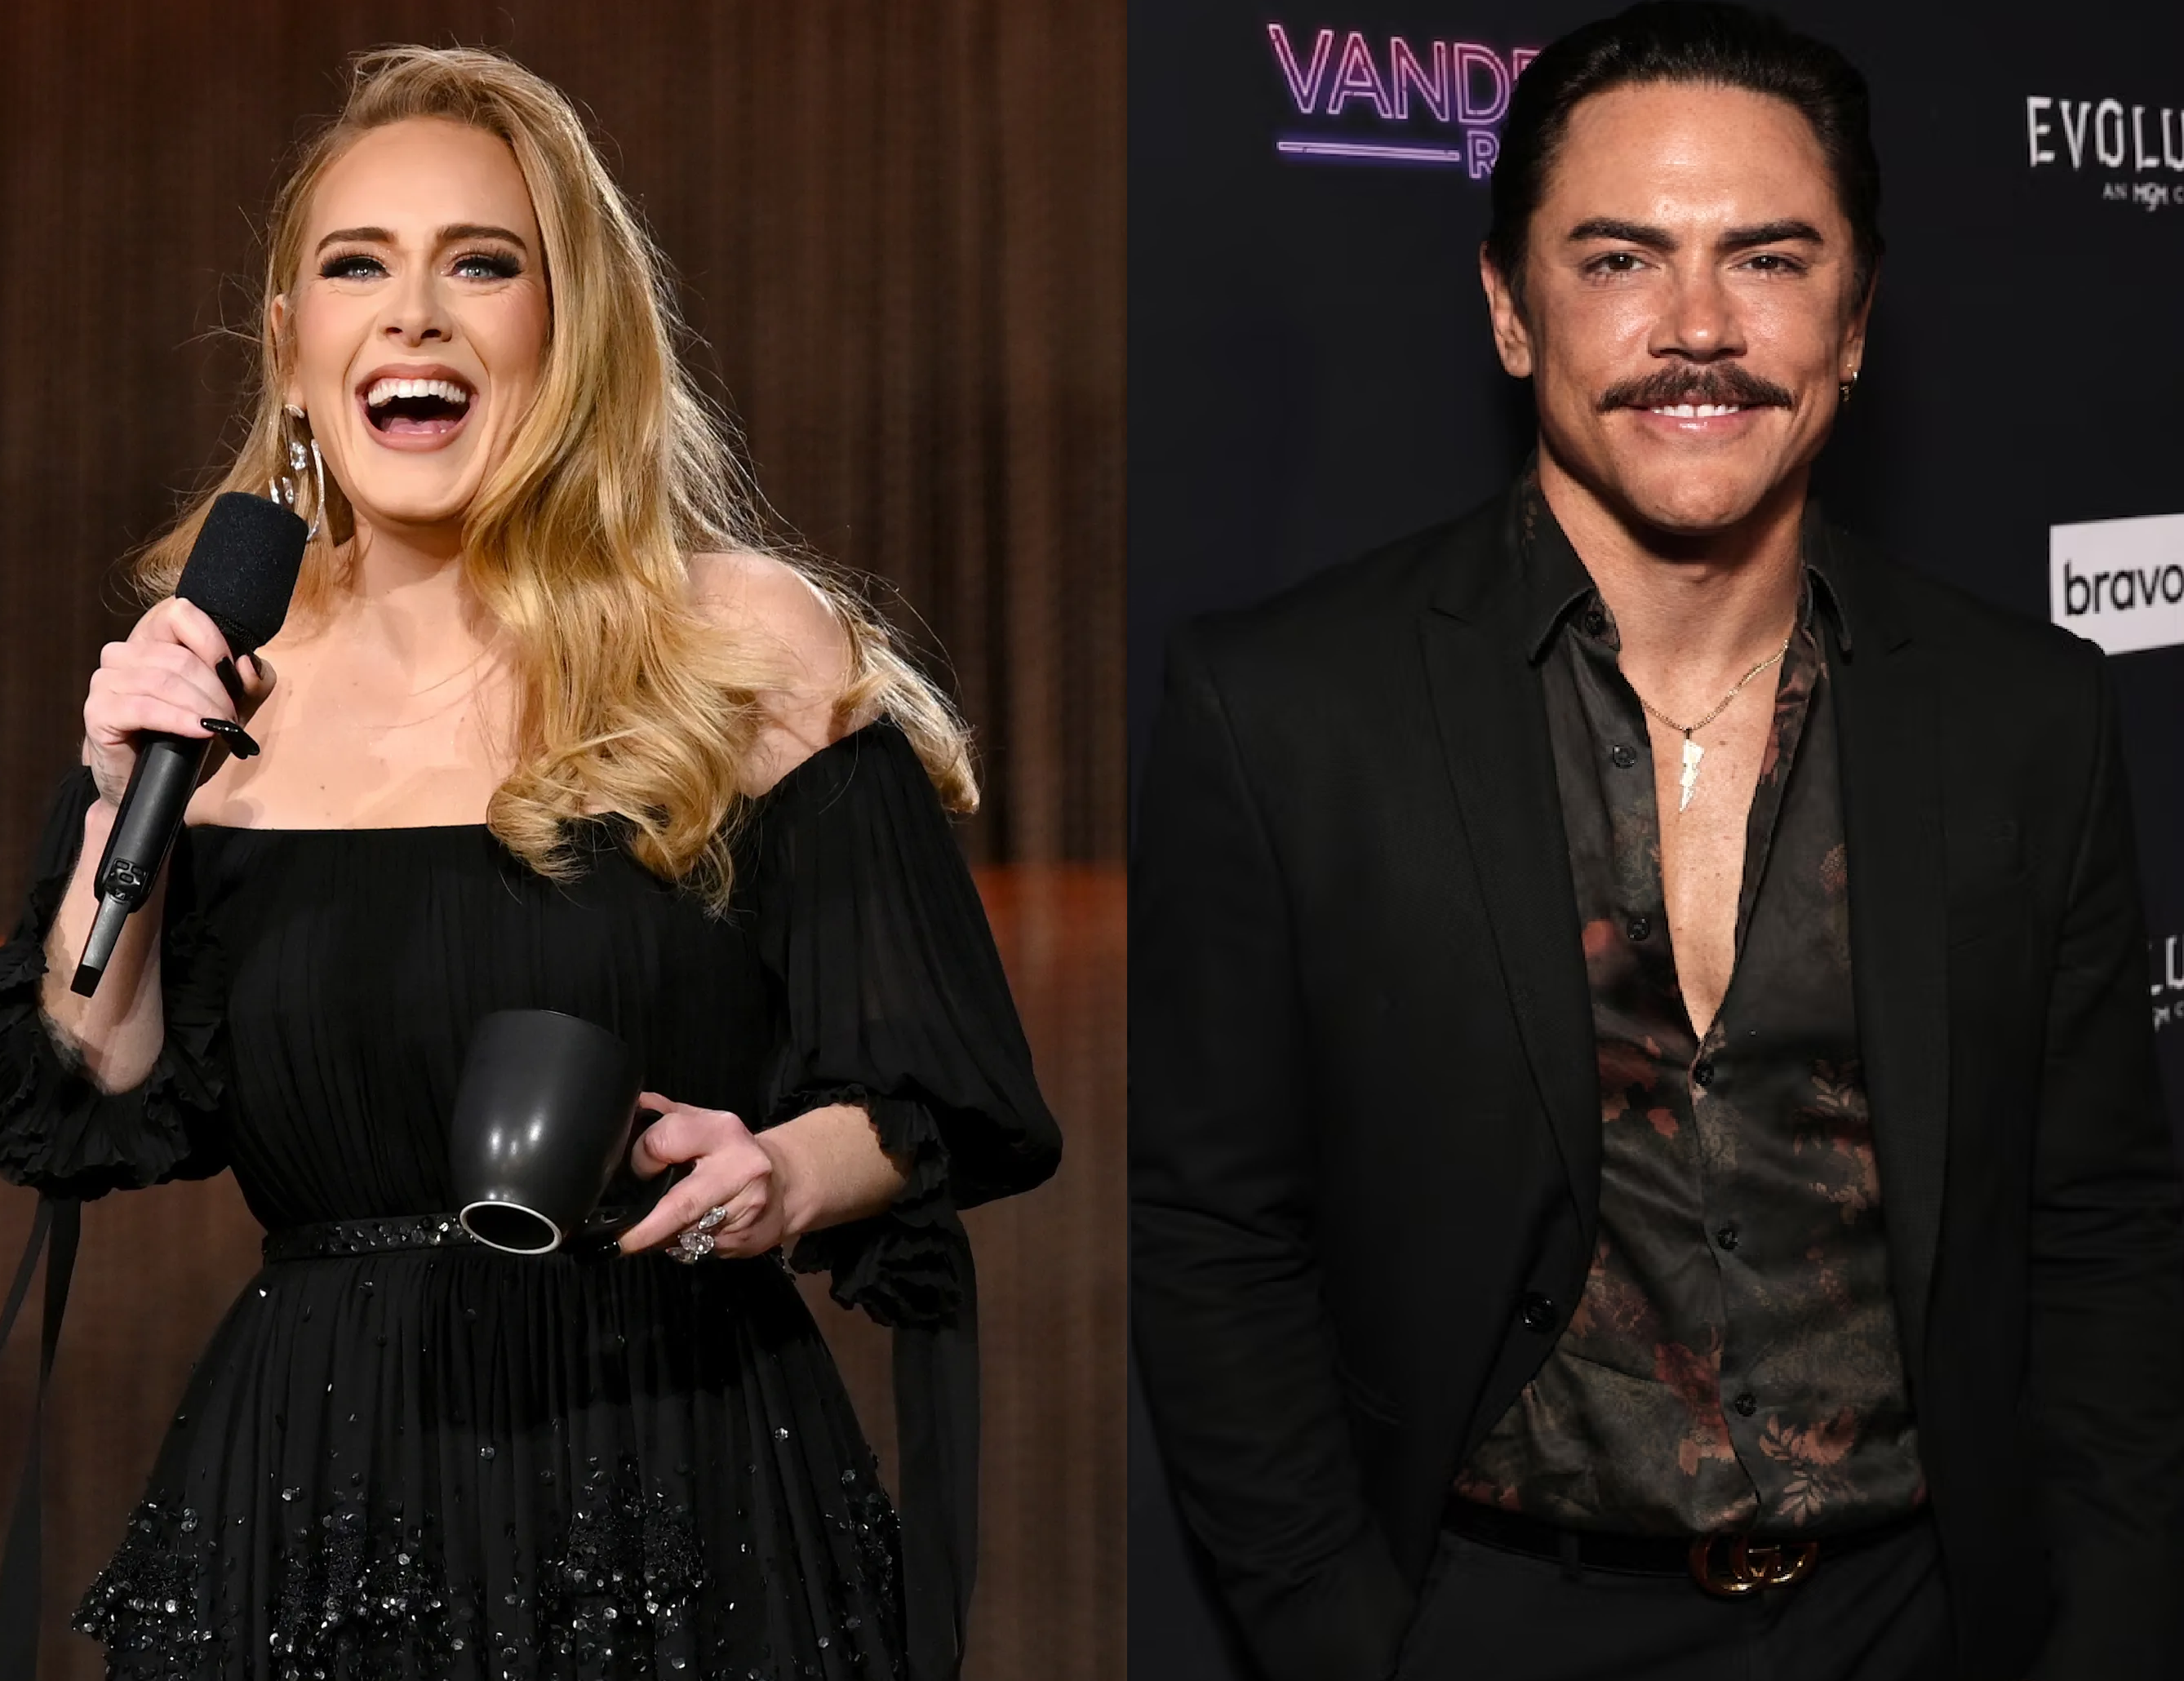 Adele Takes a Dig at 'Vanderpump Rules' Star Tom Sandoval, Asks Vegas Residency Fans to Explain ‘Scandoval’ Controversy